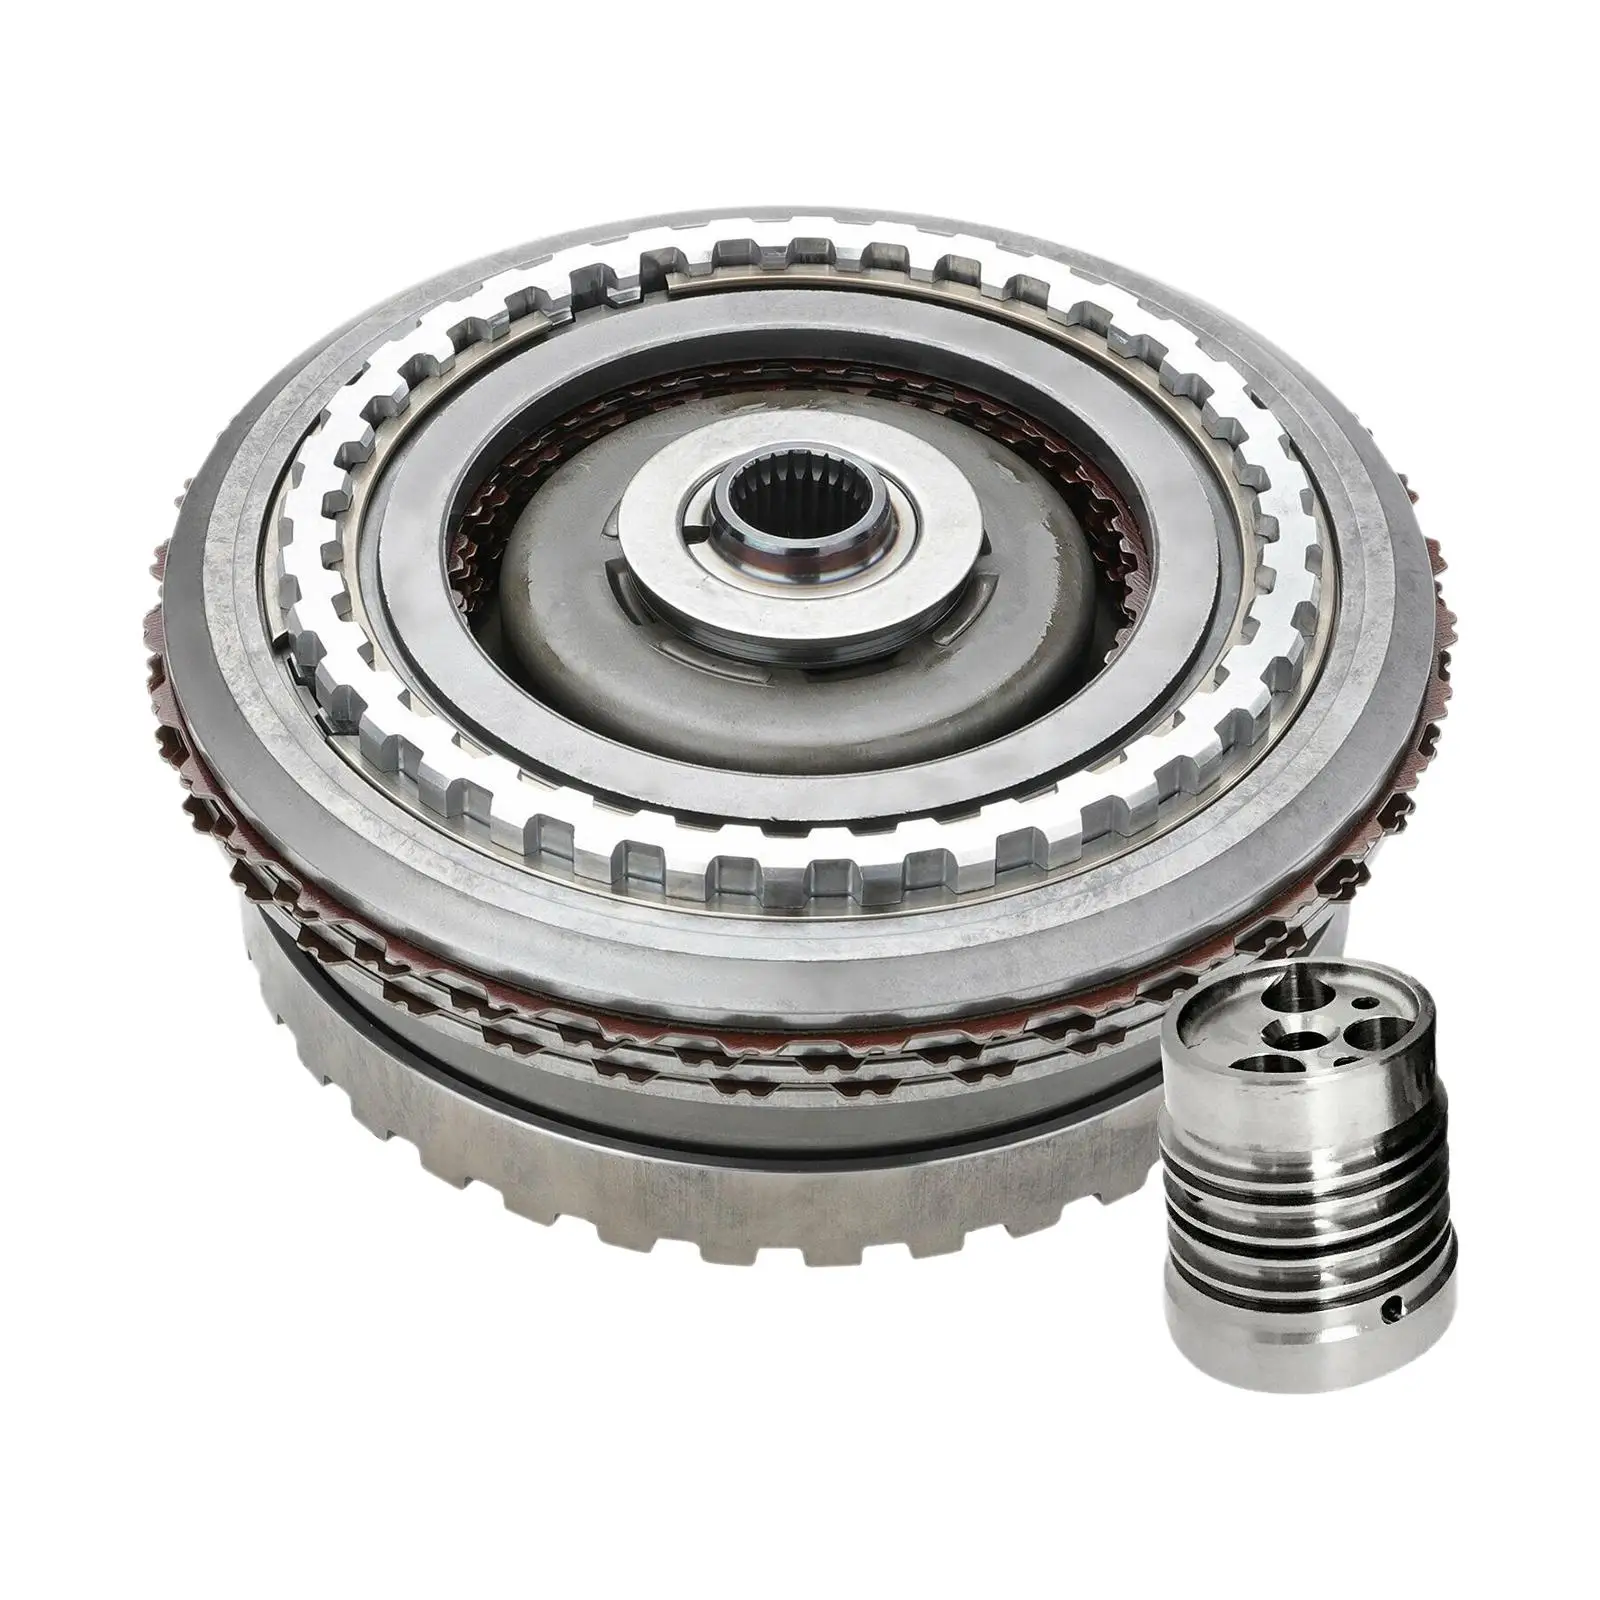 Transmission Clutch Assembly Input Drum 6T45 6T30E 6T45E 6T30 6T40 6T40E for Chevrolet 08-14 Replace High Quality